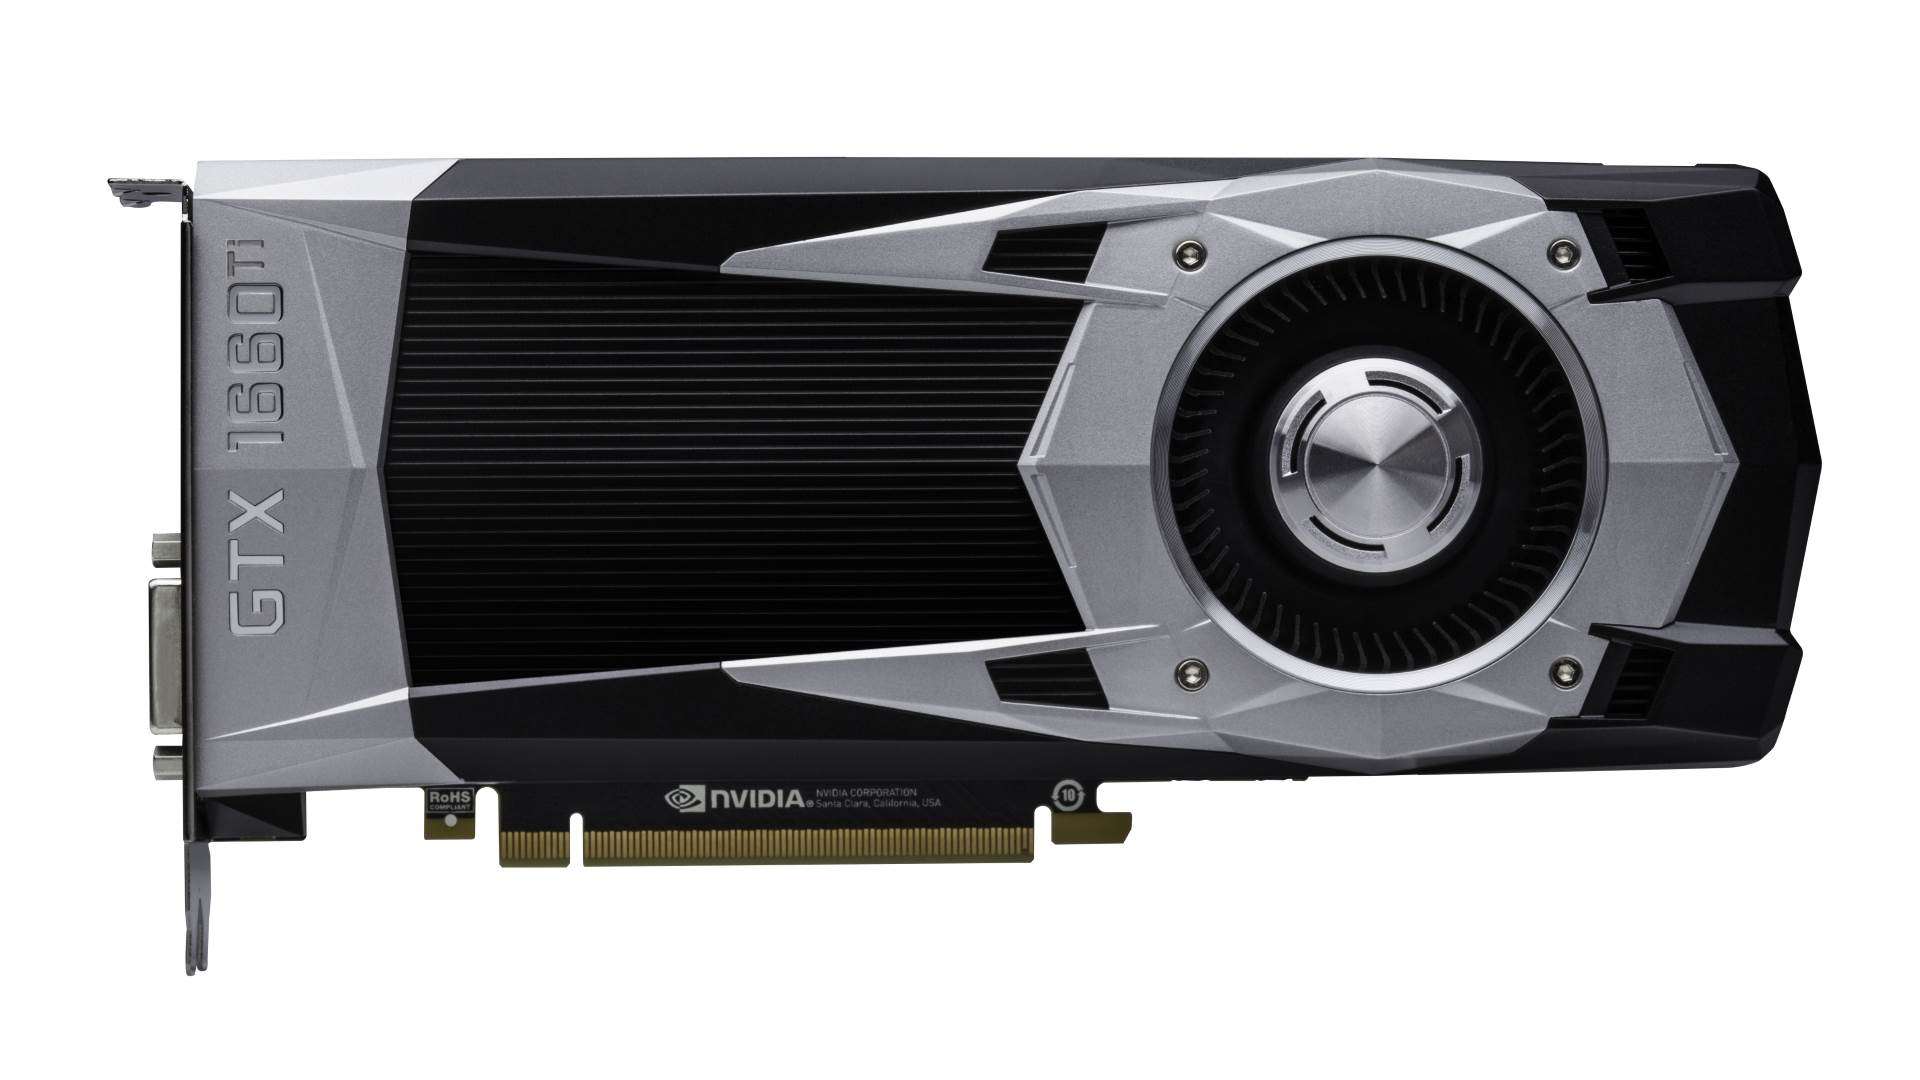 Nvidia 1660 Ti outperforms GTX 1060 by 19% in benchmark leak | PCGamesN